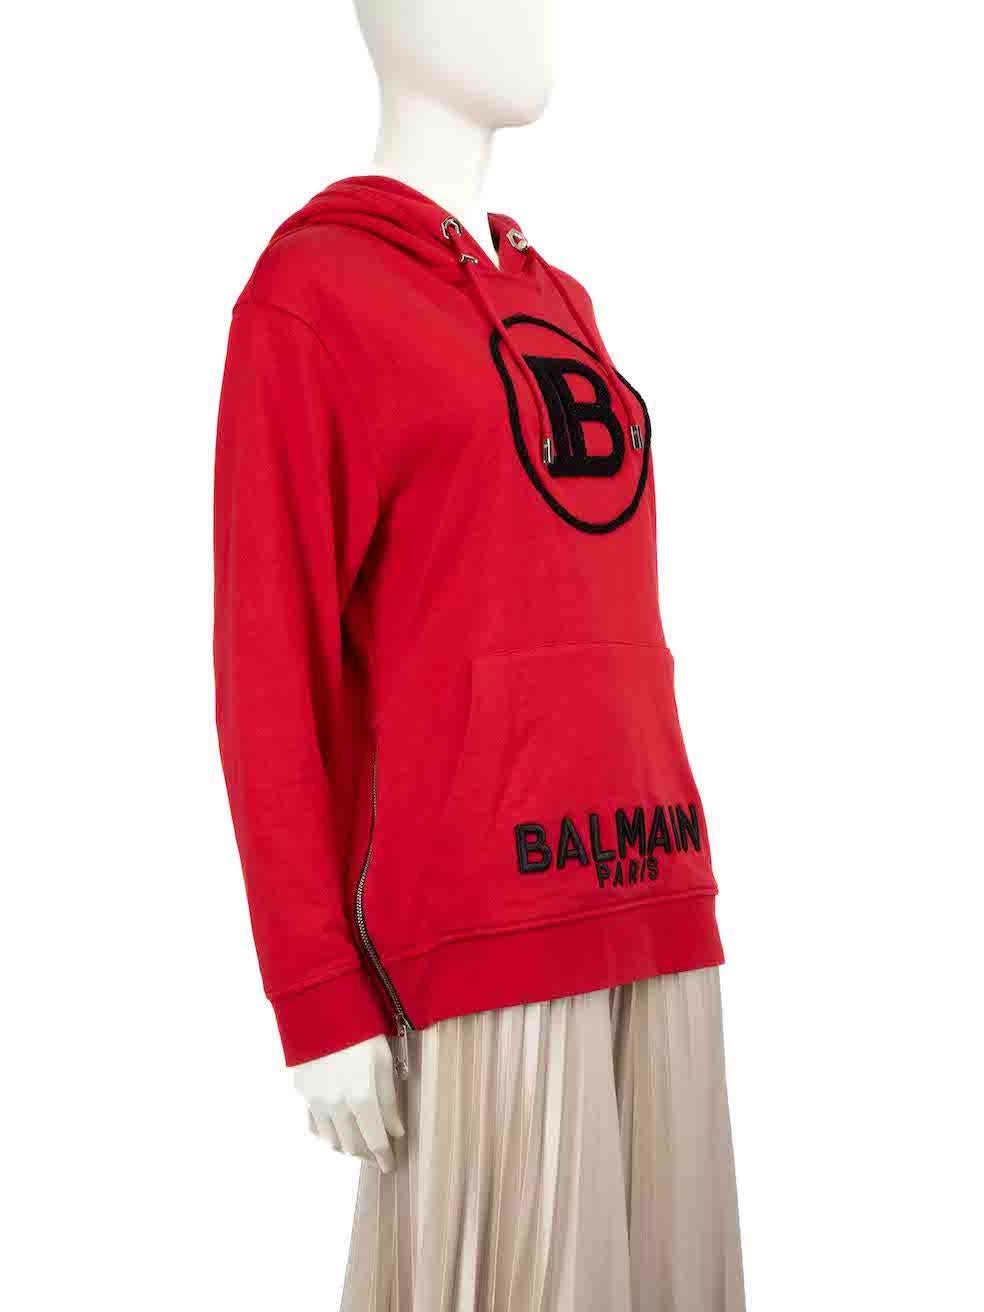 CONDITION is Very good. Minimal wear to hoodie is evident. Minimal marks on the front right side of the pocket and the front inner hemline. Small scratch on the right drawstring hardware on this used Balmain designer resale item.
 
 
 
 Details
 
 
